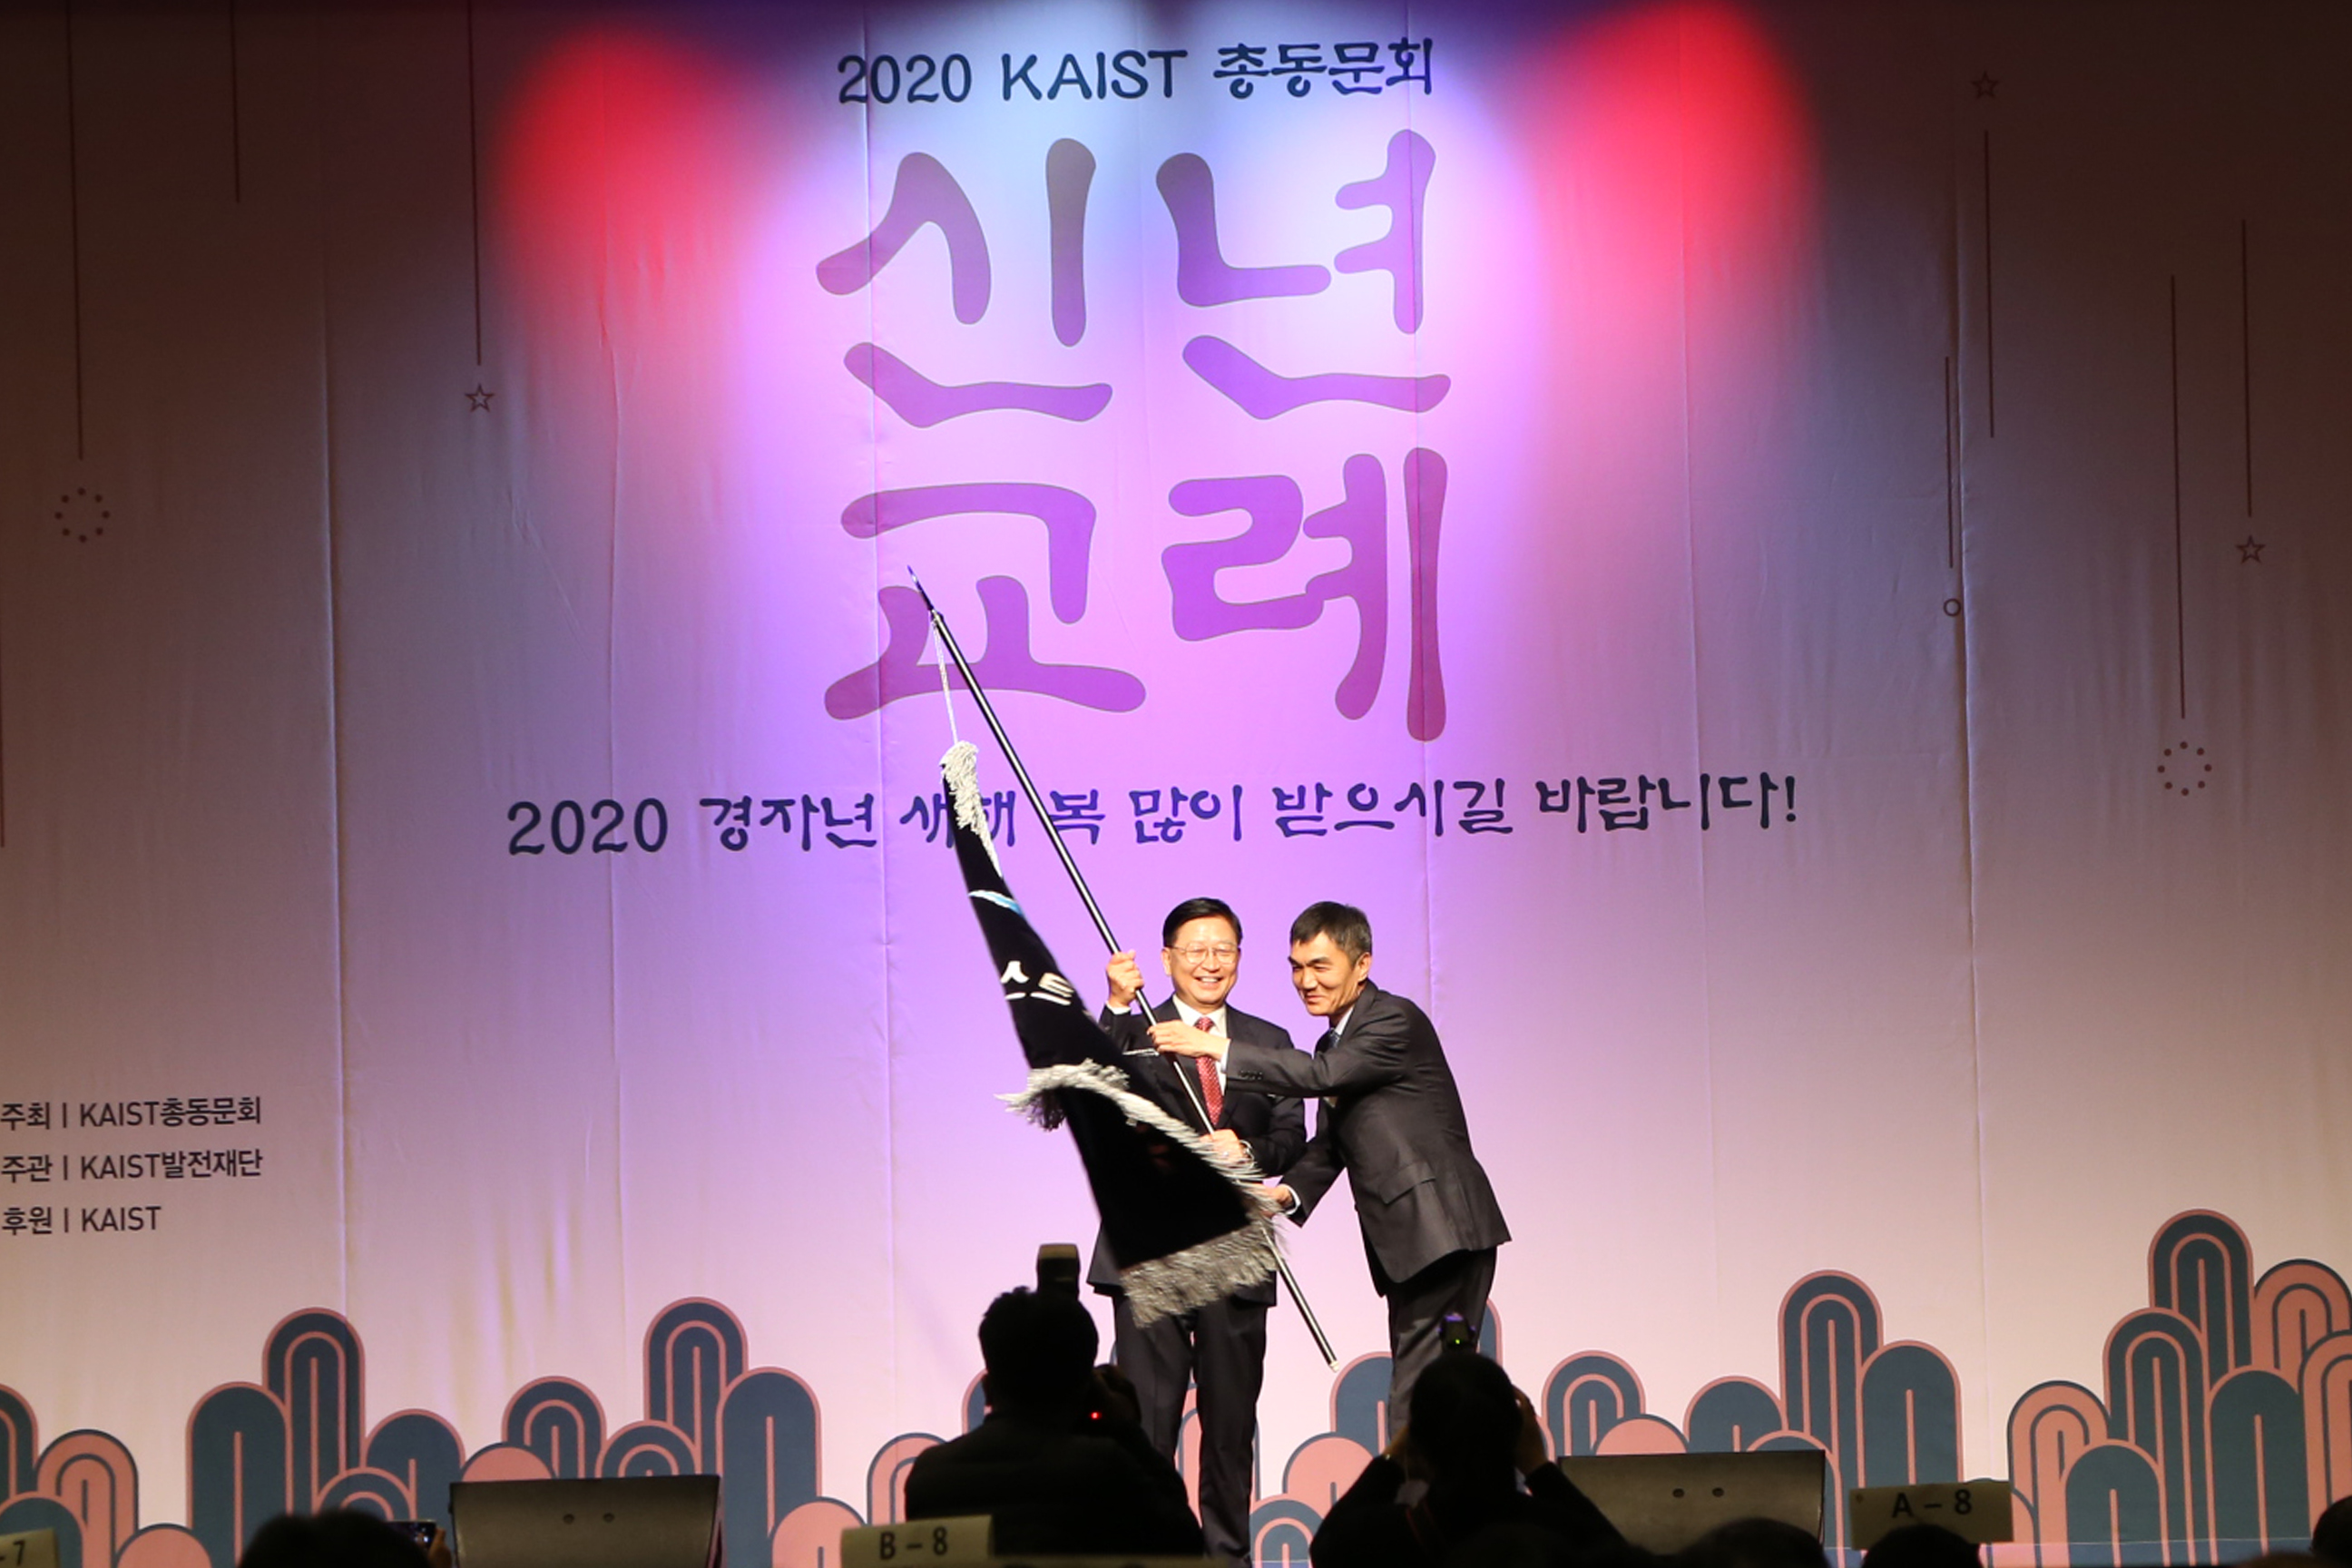  The new president Chilhee Chung (left) and the former president Ki-Chul Cha (right) 